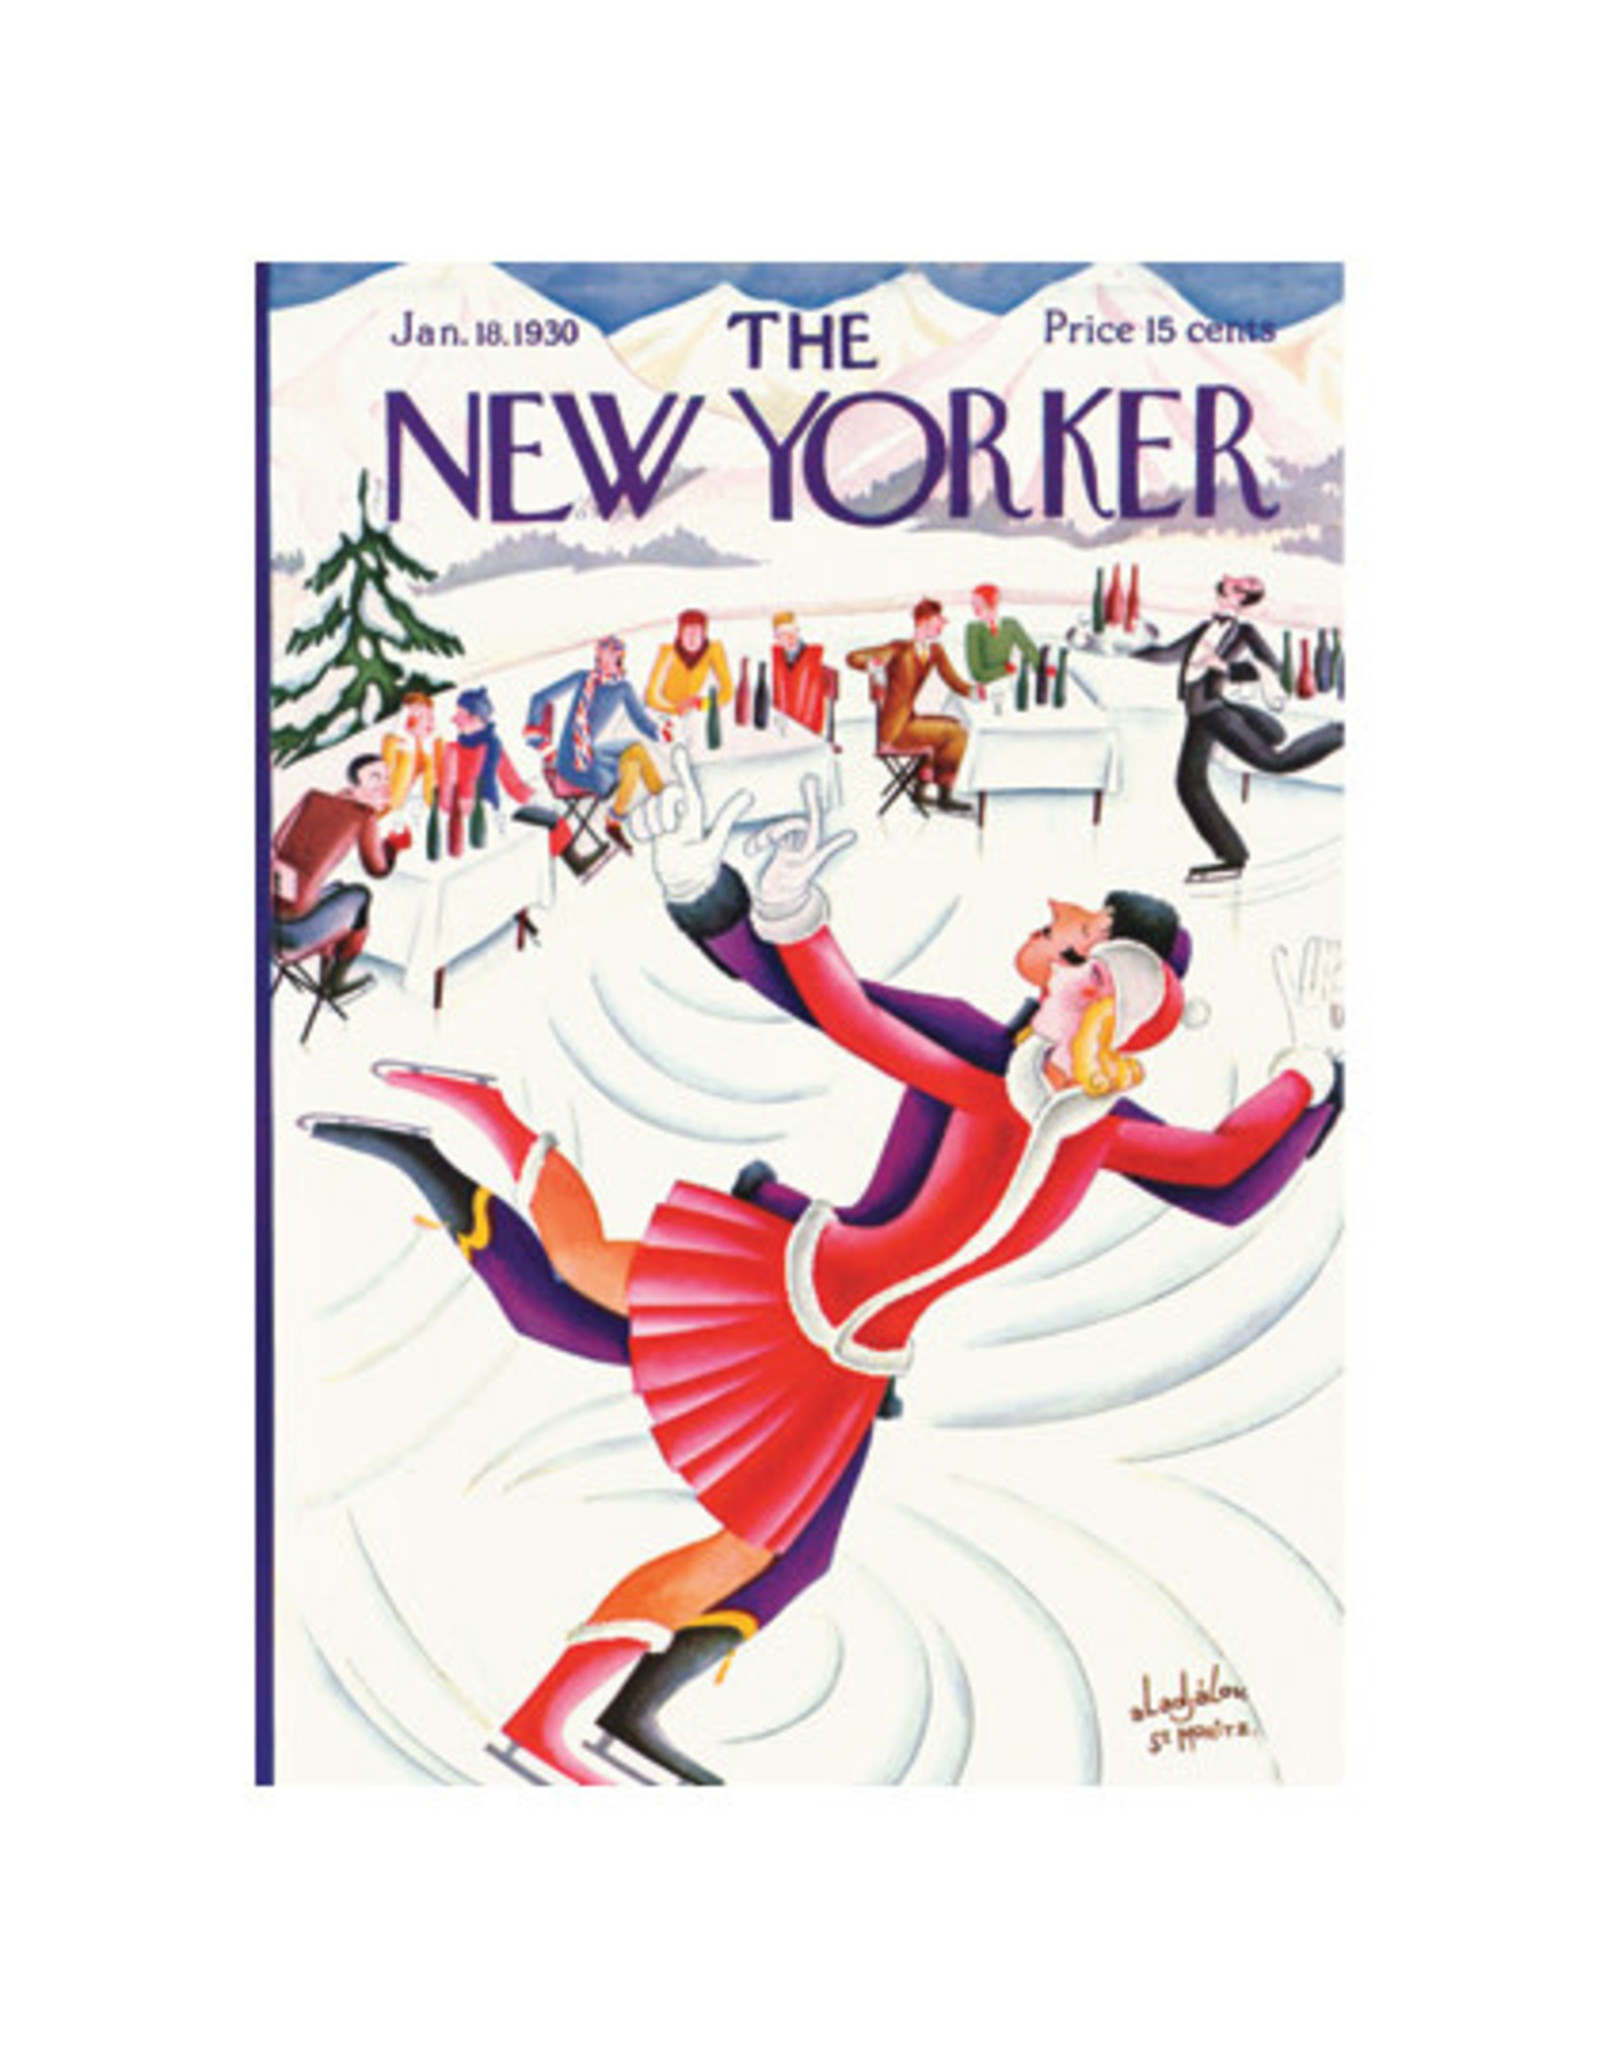 The New Yorker Skating in St. Moritz A7 Christmas Notecard